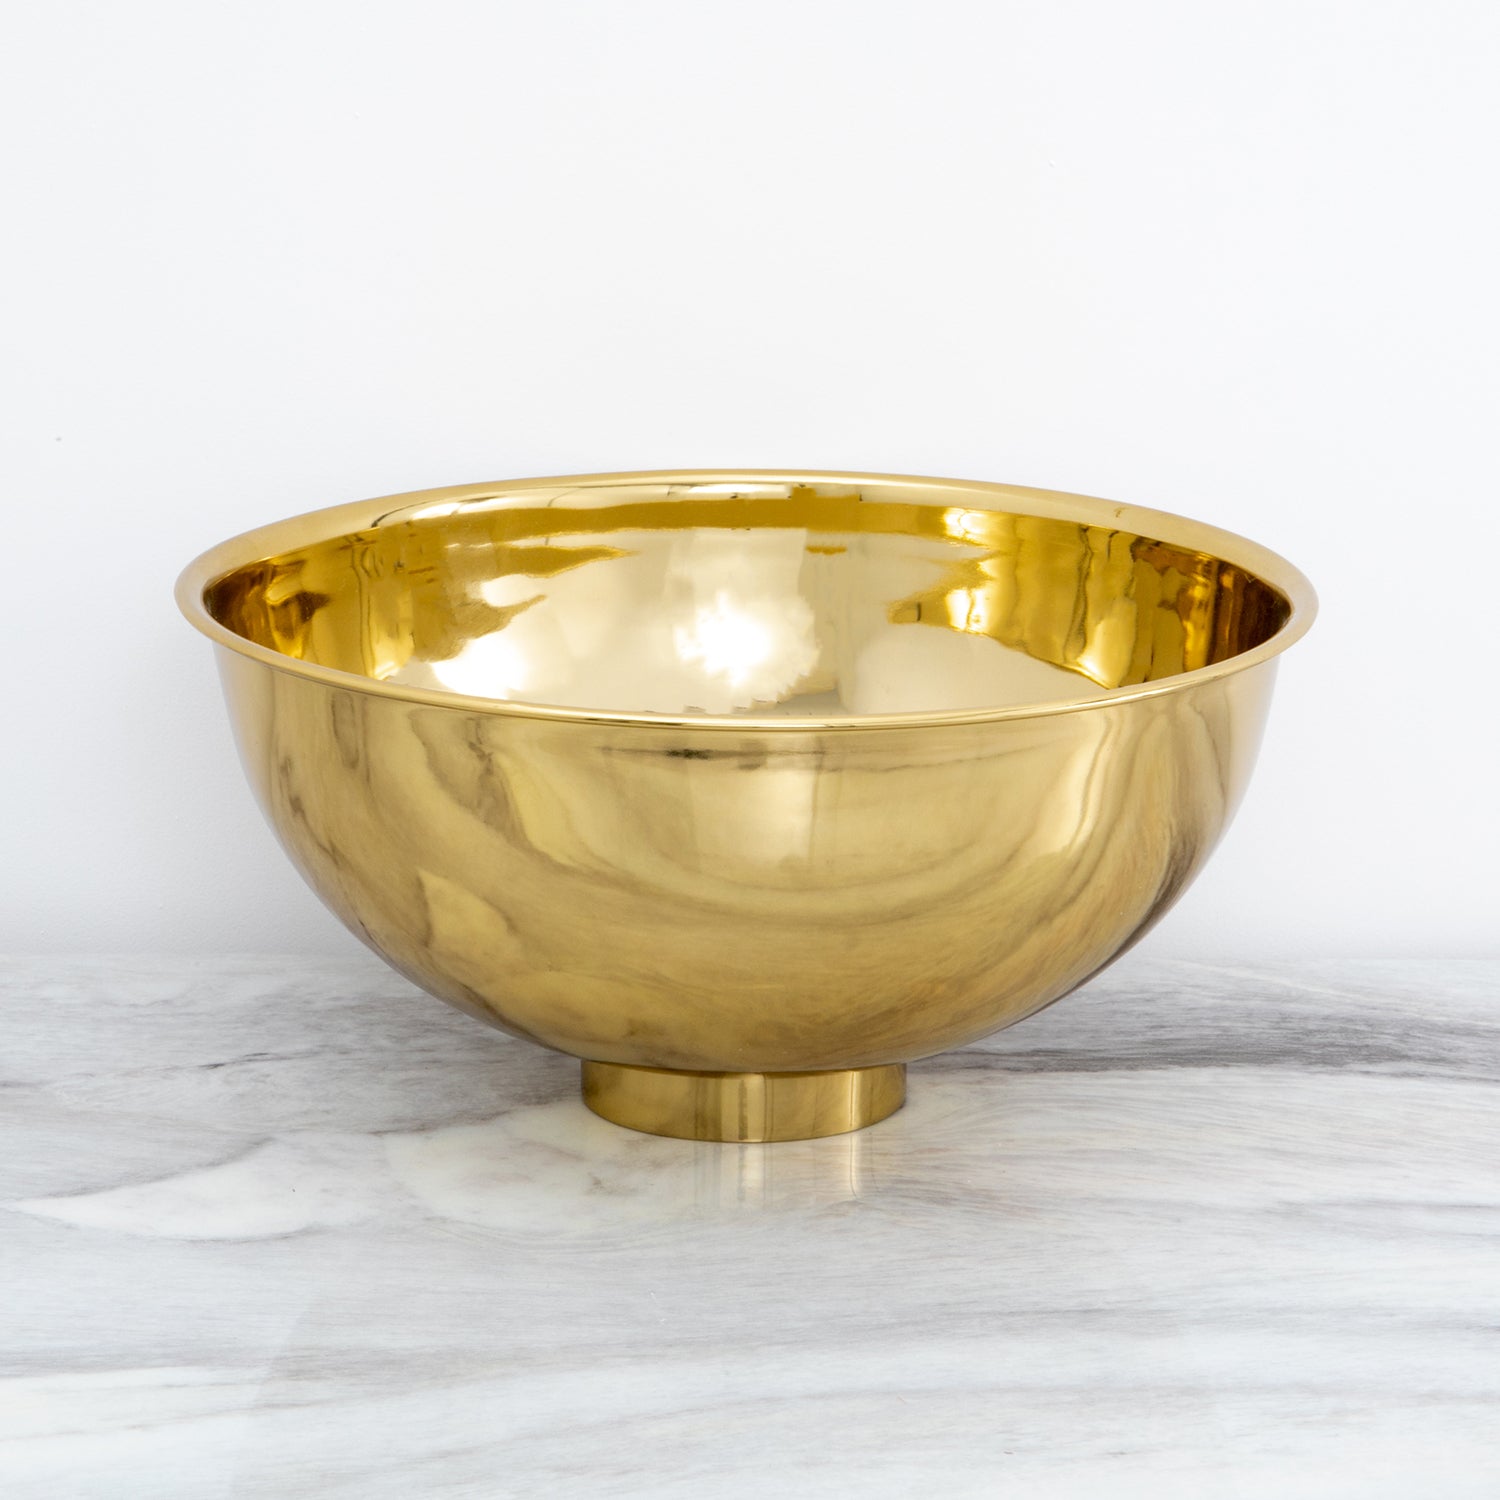 Gold plated mirror polished bowl by Native